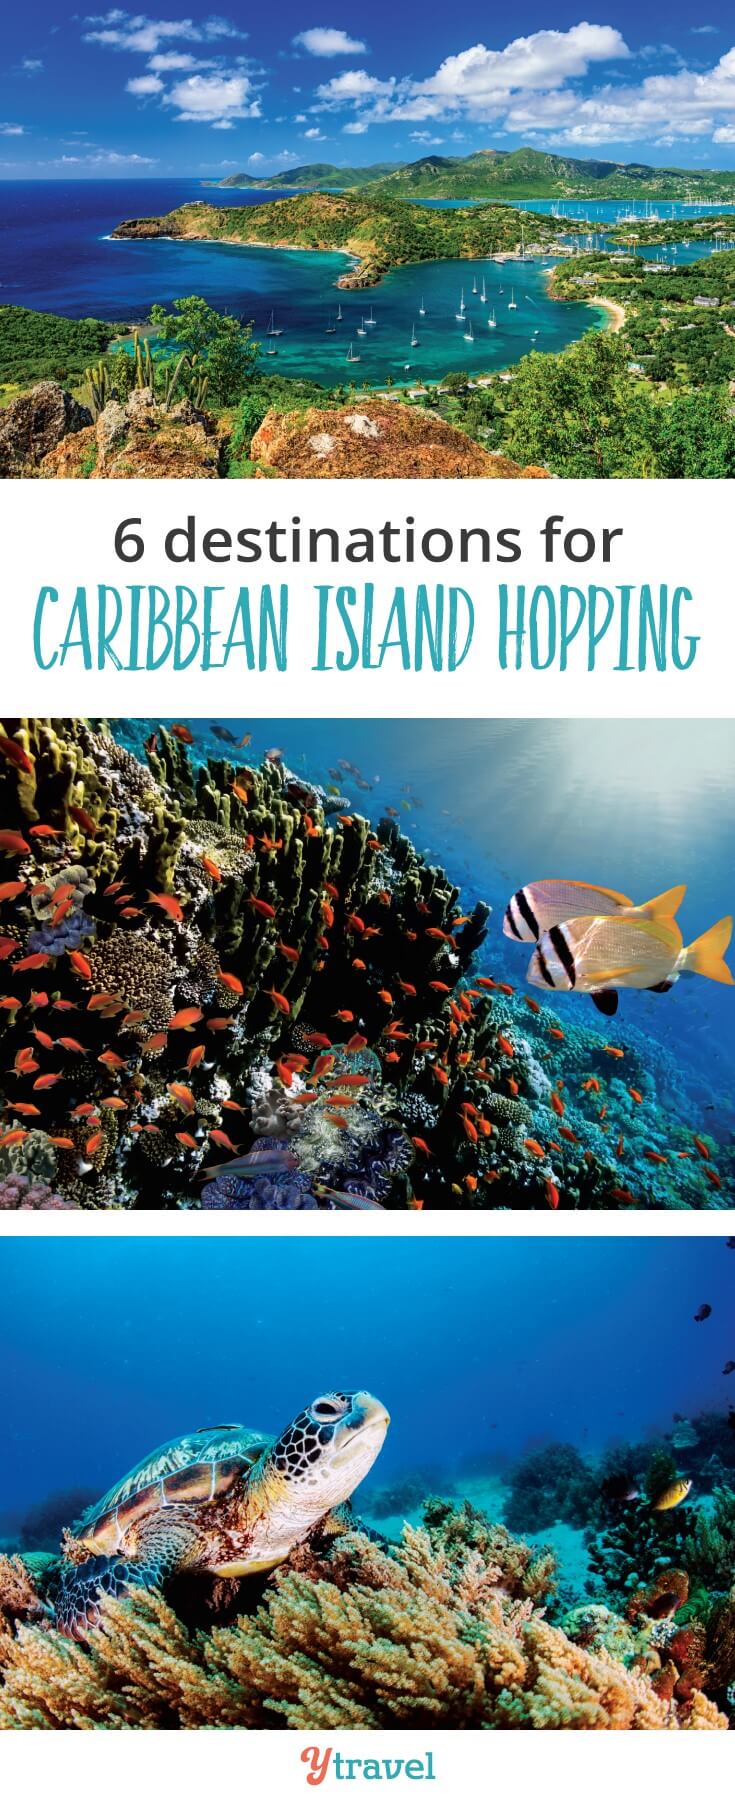 There are so many Caribbean Islands to explore. Here are the best destinations for Caribbean Island Hopping. Go find those turtles and have some fun. #caribbean #Caribbeanislands #islandhopping